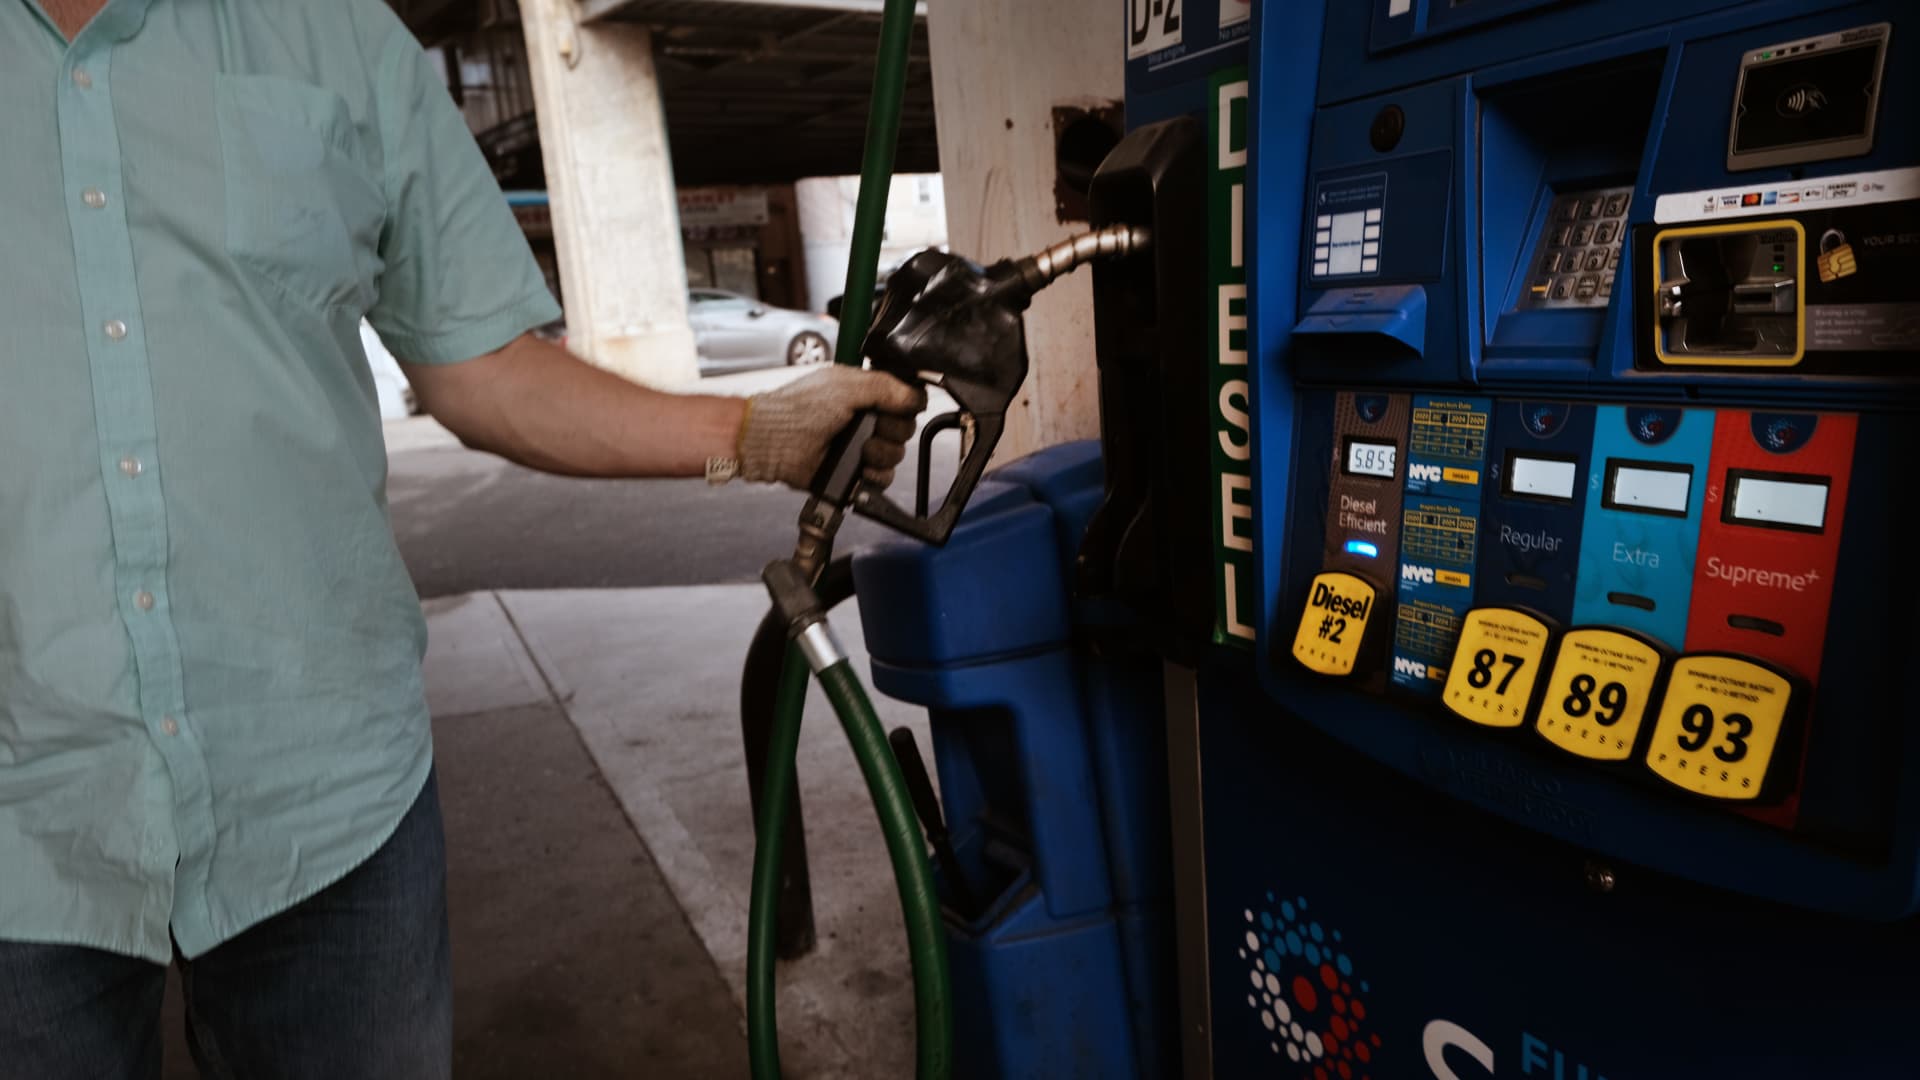 Gasoline prices are expected to continue to fall after Labor Day and some states could see below 